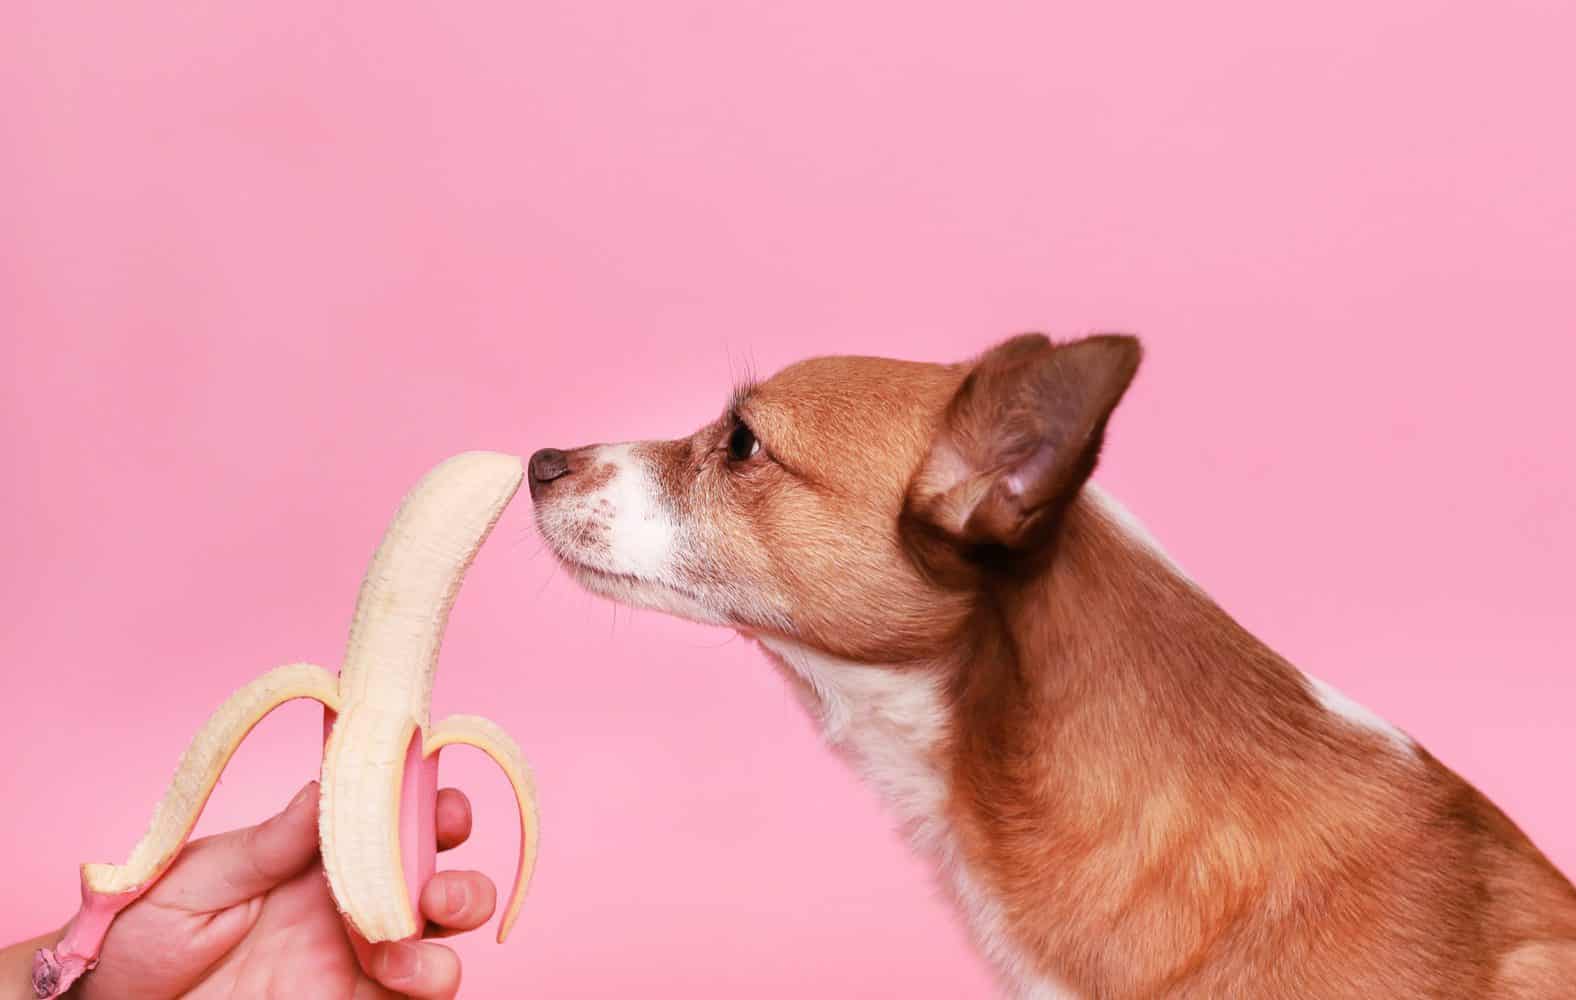 Is it safe for my dog to eat a banana?